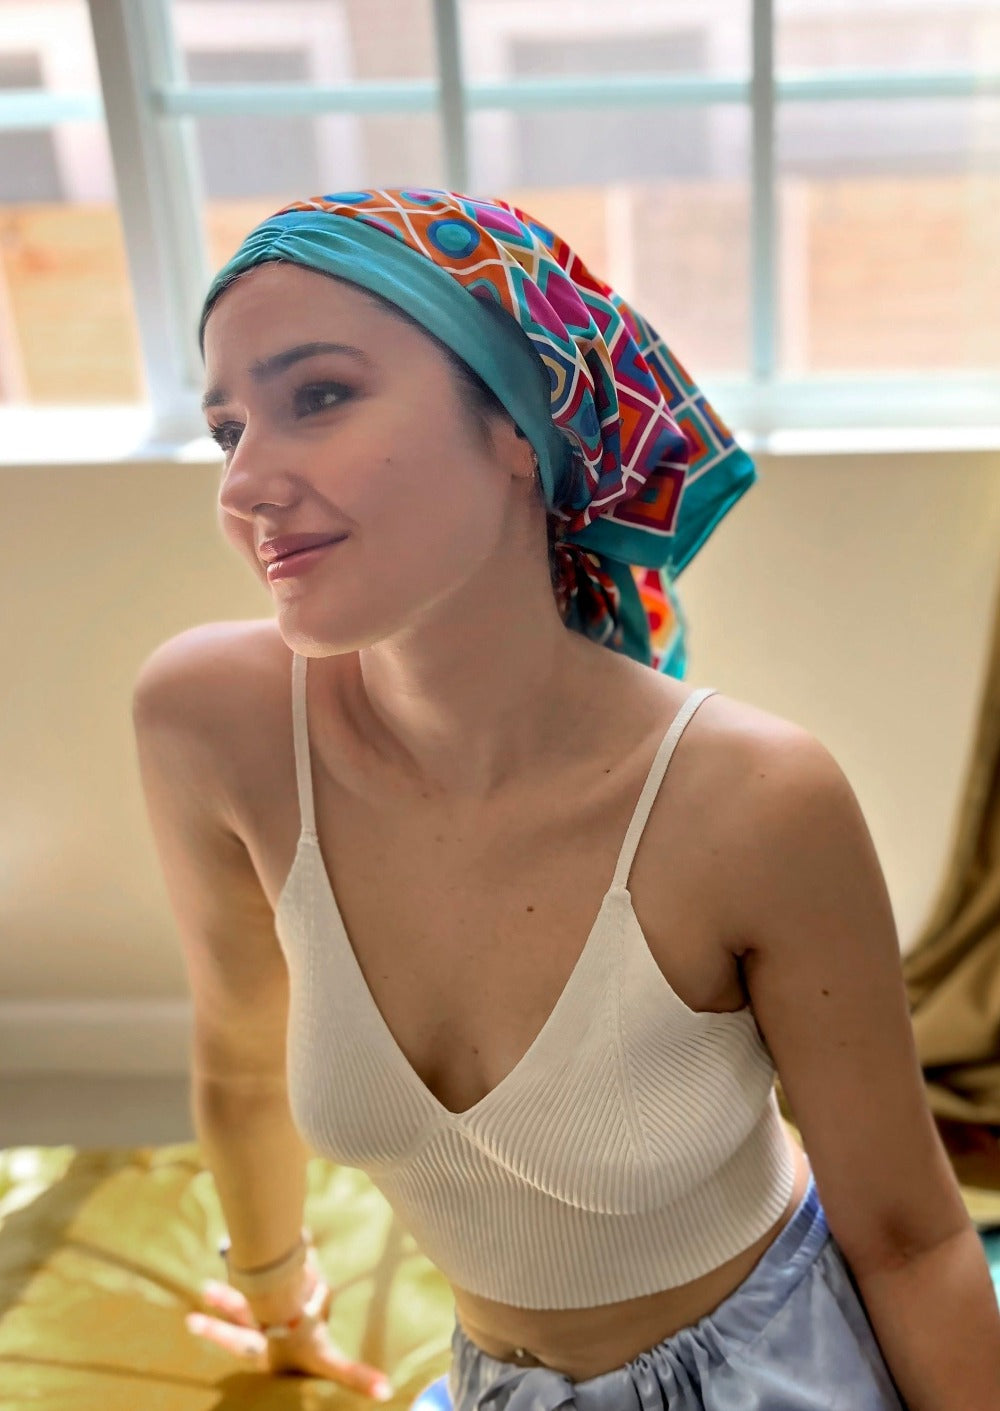 A beautiful woman, wearing an asymmetrical black shirt, sits smiling looking to the side, in her living room. She wears a headscarf on her head, the headscarf is made up of multiple layers, the base layer is a rich teal color stretch cotton, that appears